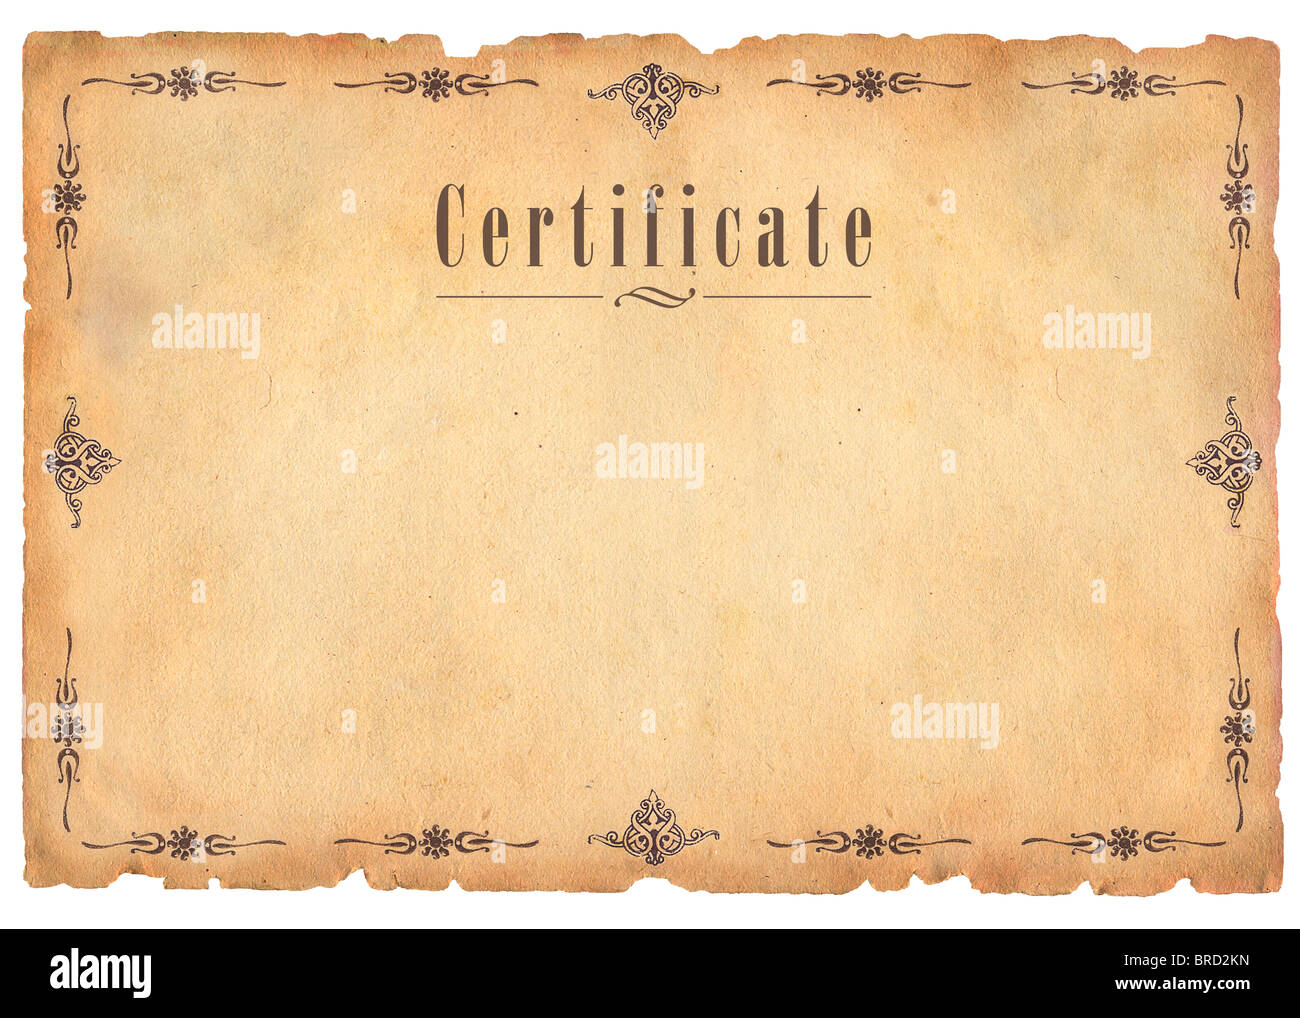 Certificate background Stock Photo